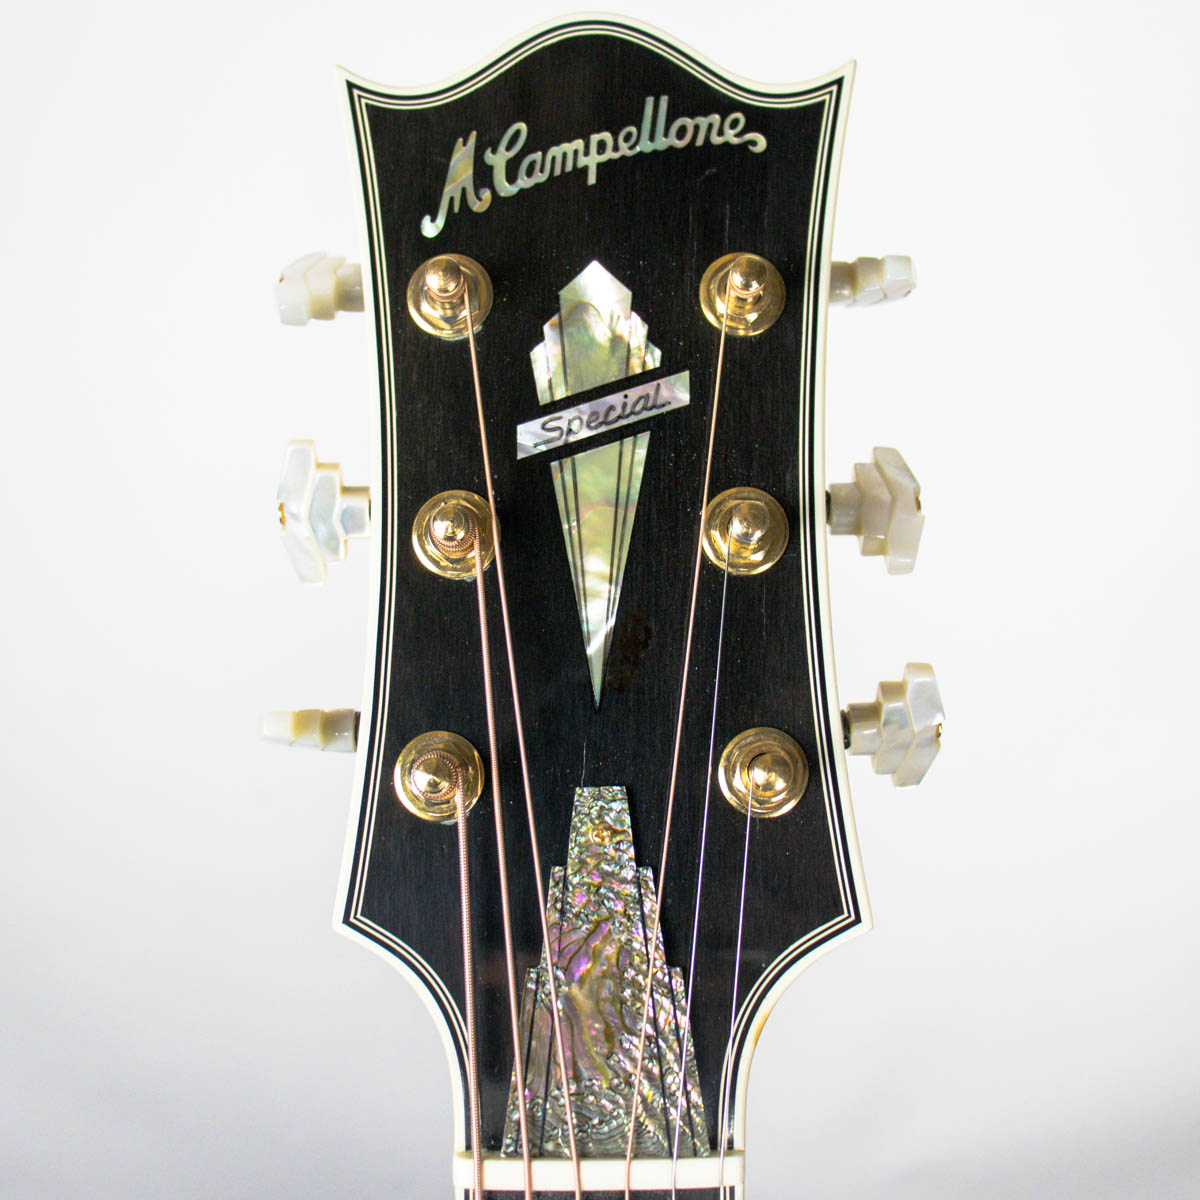 Imitation Is the Sincerest Form of Flattery-campellone-headstock_1-jpg